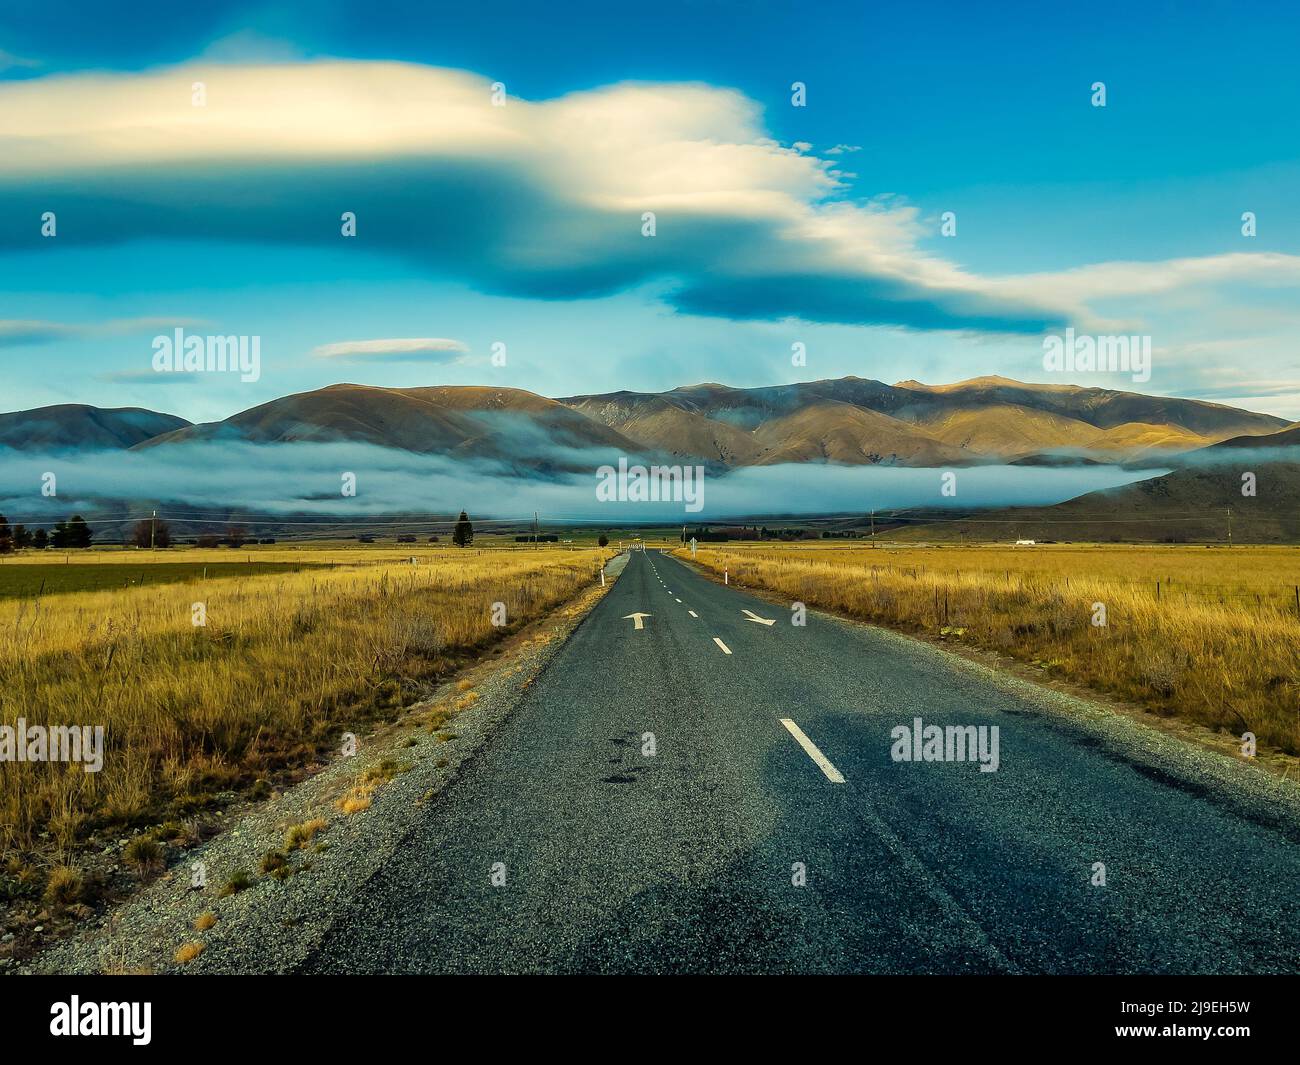 The asphalt road heading to  the fluffy cloud both above and below the hills Stock Photo